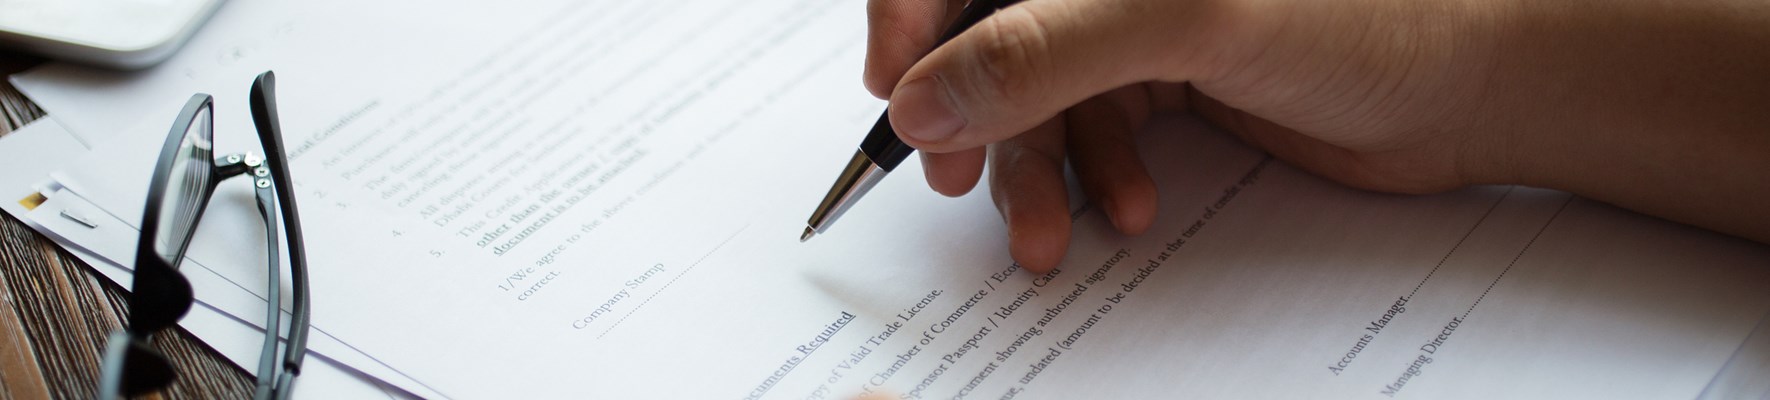 Person signing a document with a pen